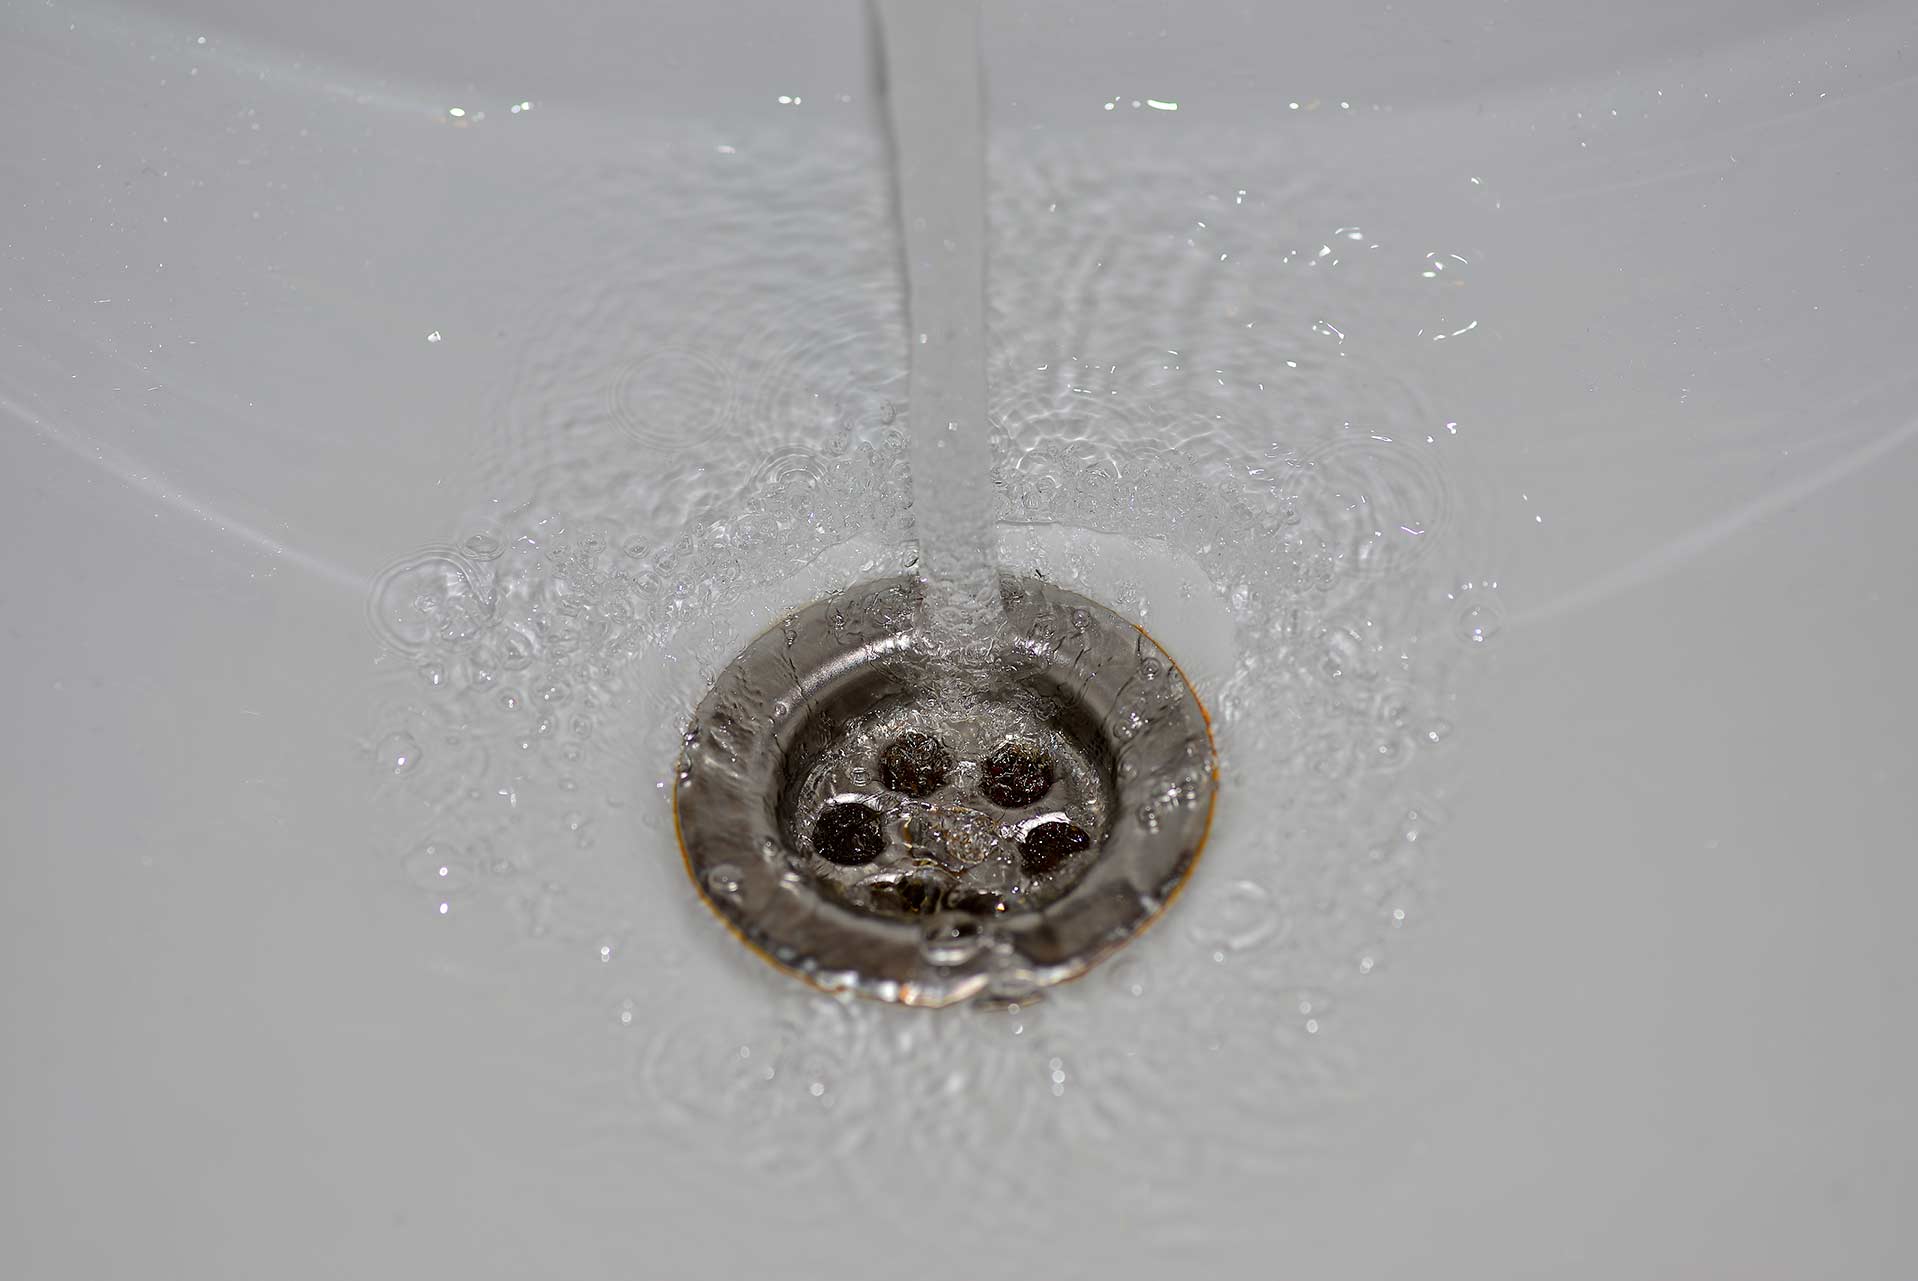 A2B Drains provides services to unblock blocked sinks and drains for properties in Clacton.